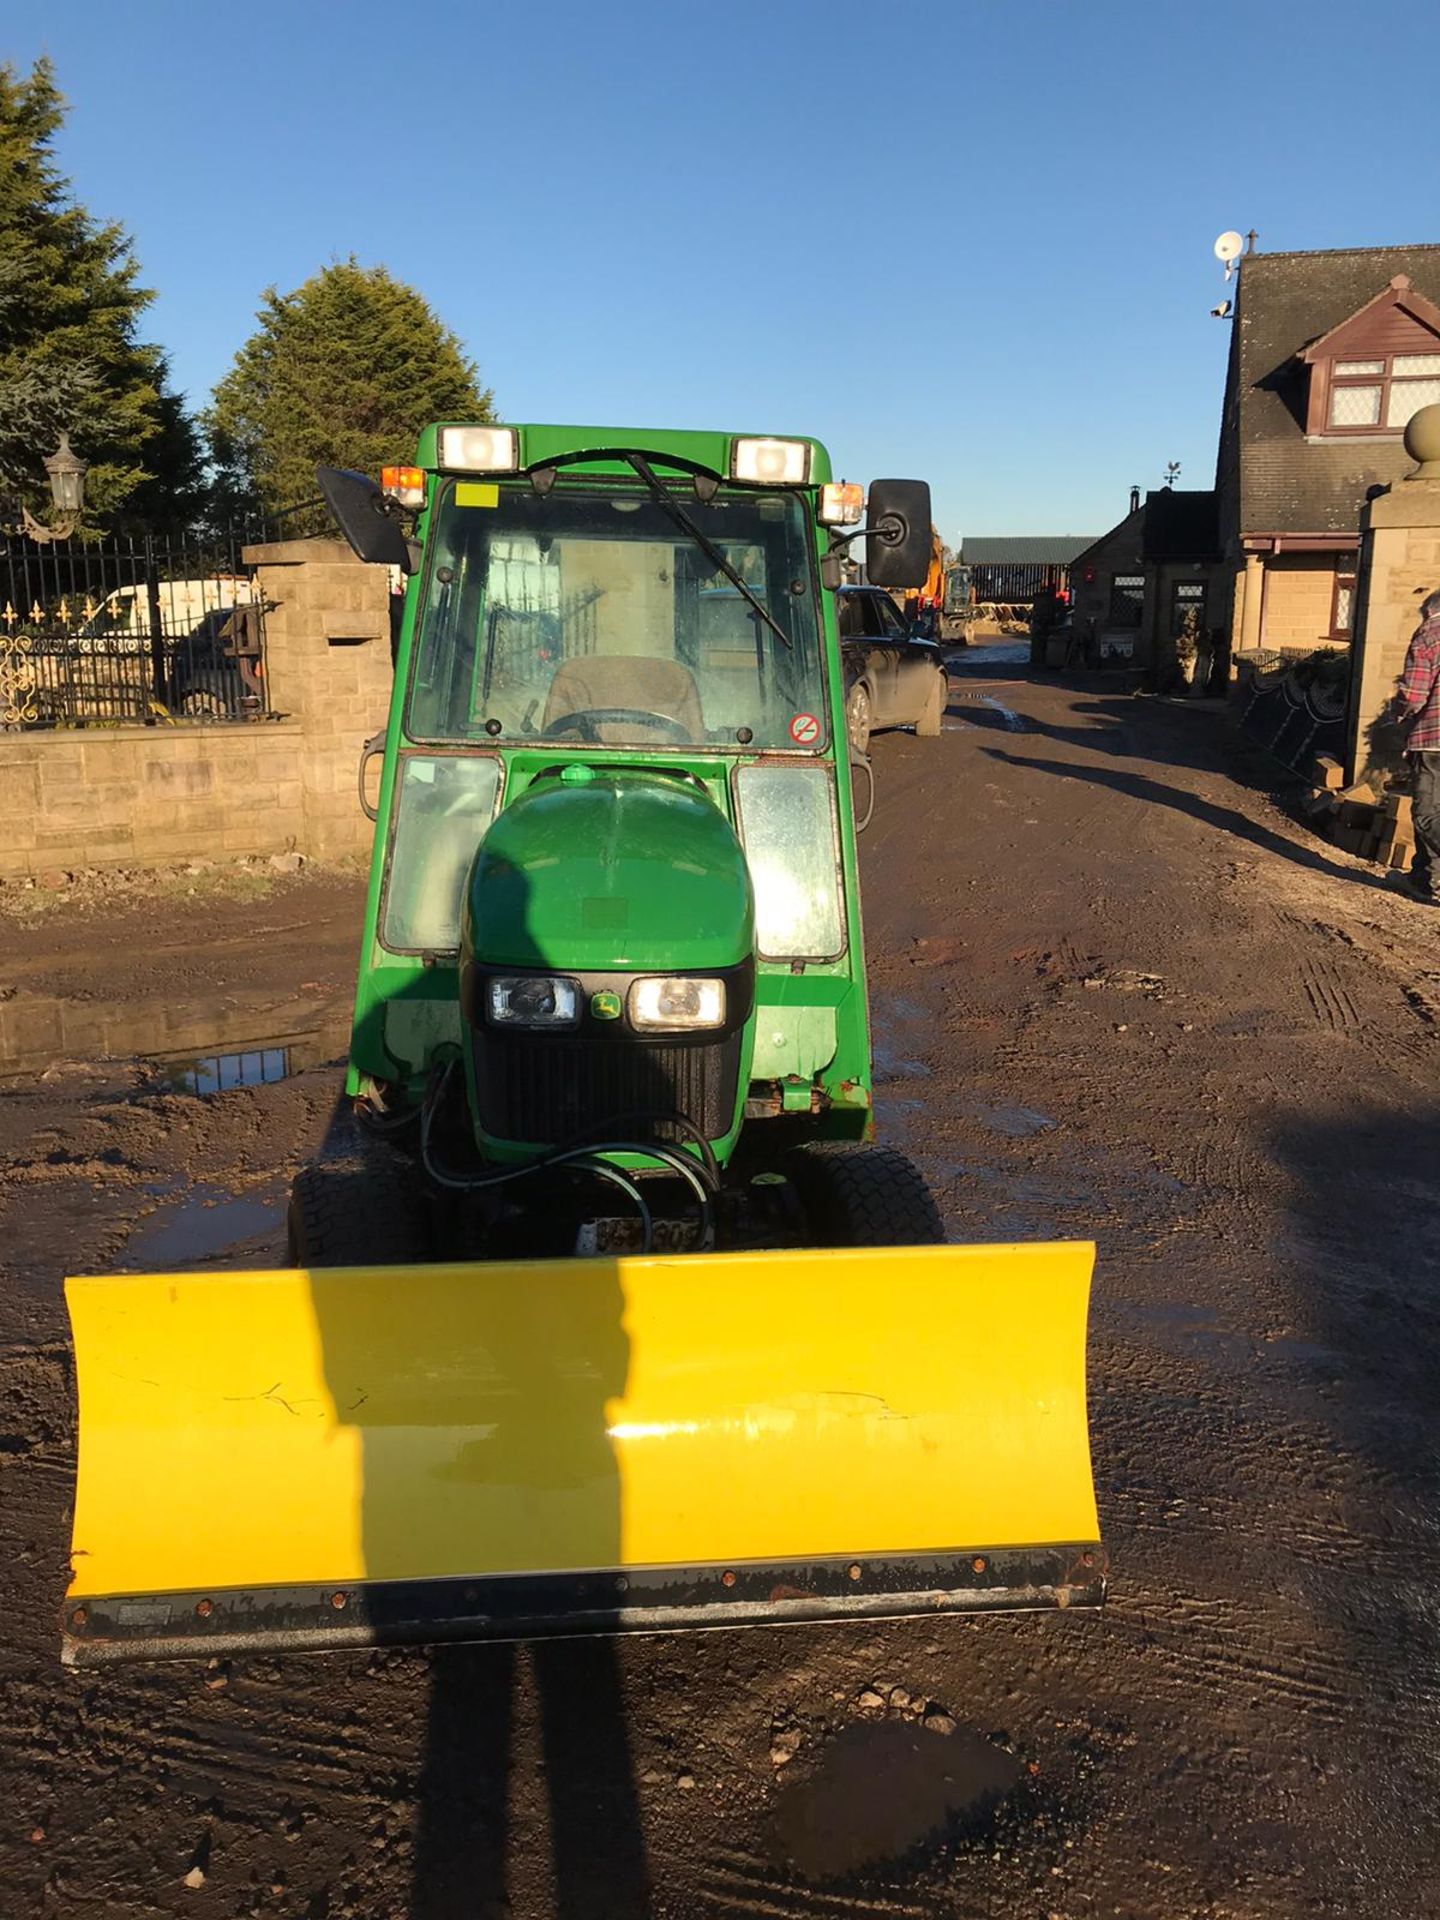 JOHN DEERE 2025R COMPACT TRACTOR, YEAR 2014, FRONT HYDRAULICS, TILT BLADE, FULL CAB C/W REAR GRITTER - Image 2 of 5